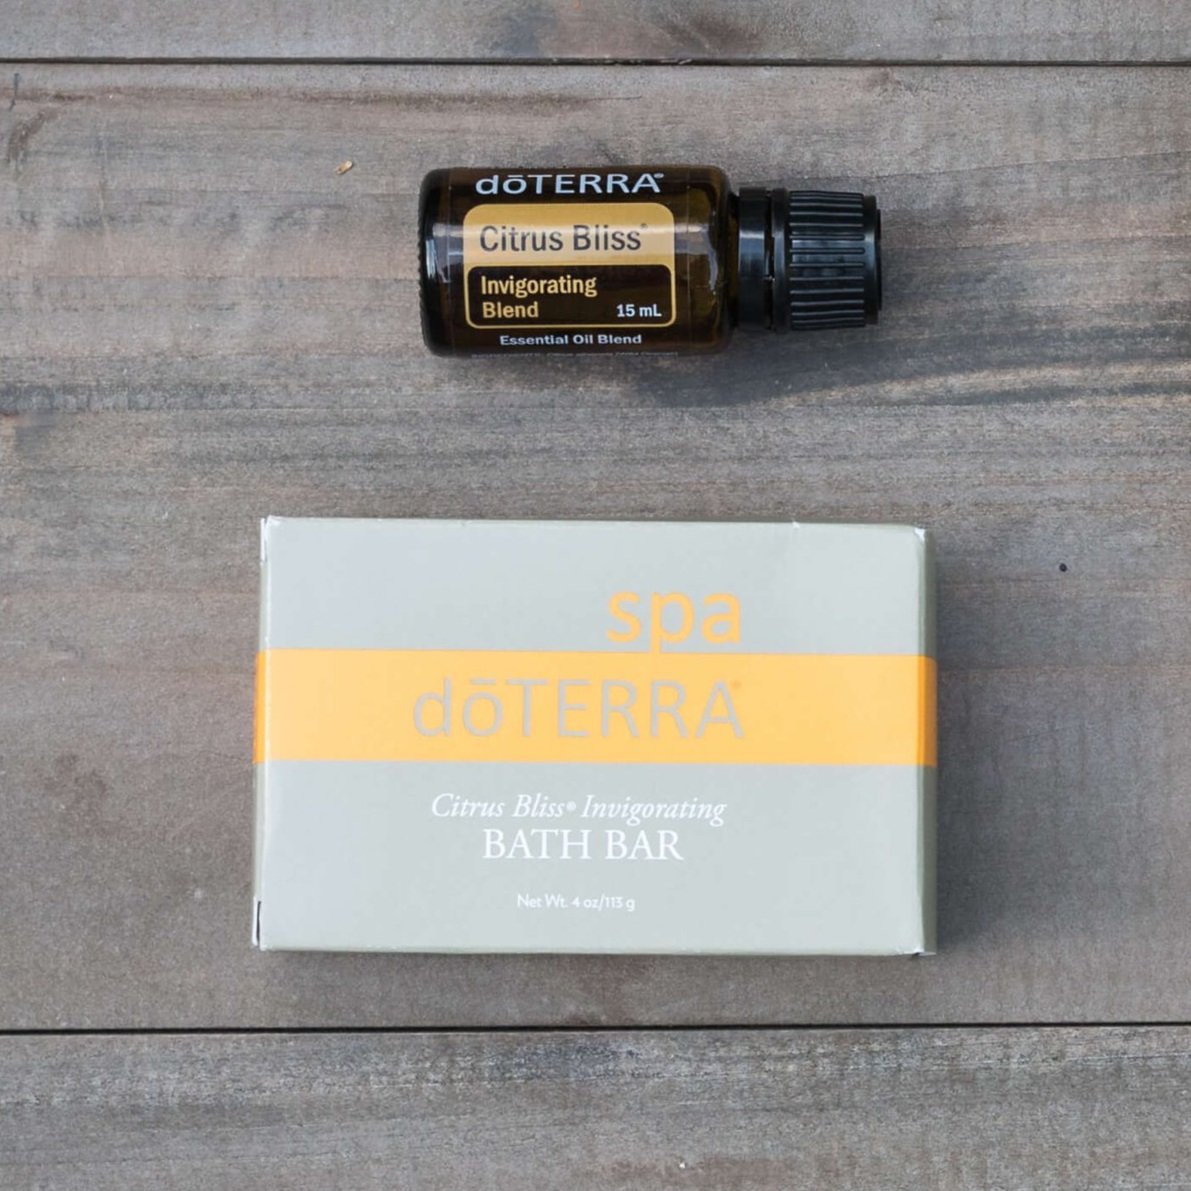 Citrus+Bliss+Collection+doTERRA+Natural+Soap+and+Moisturizer.jpg